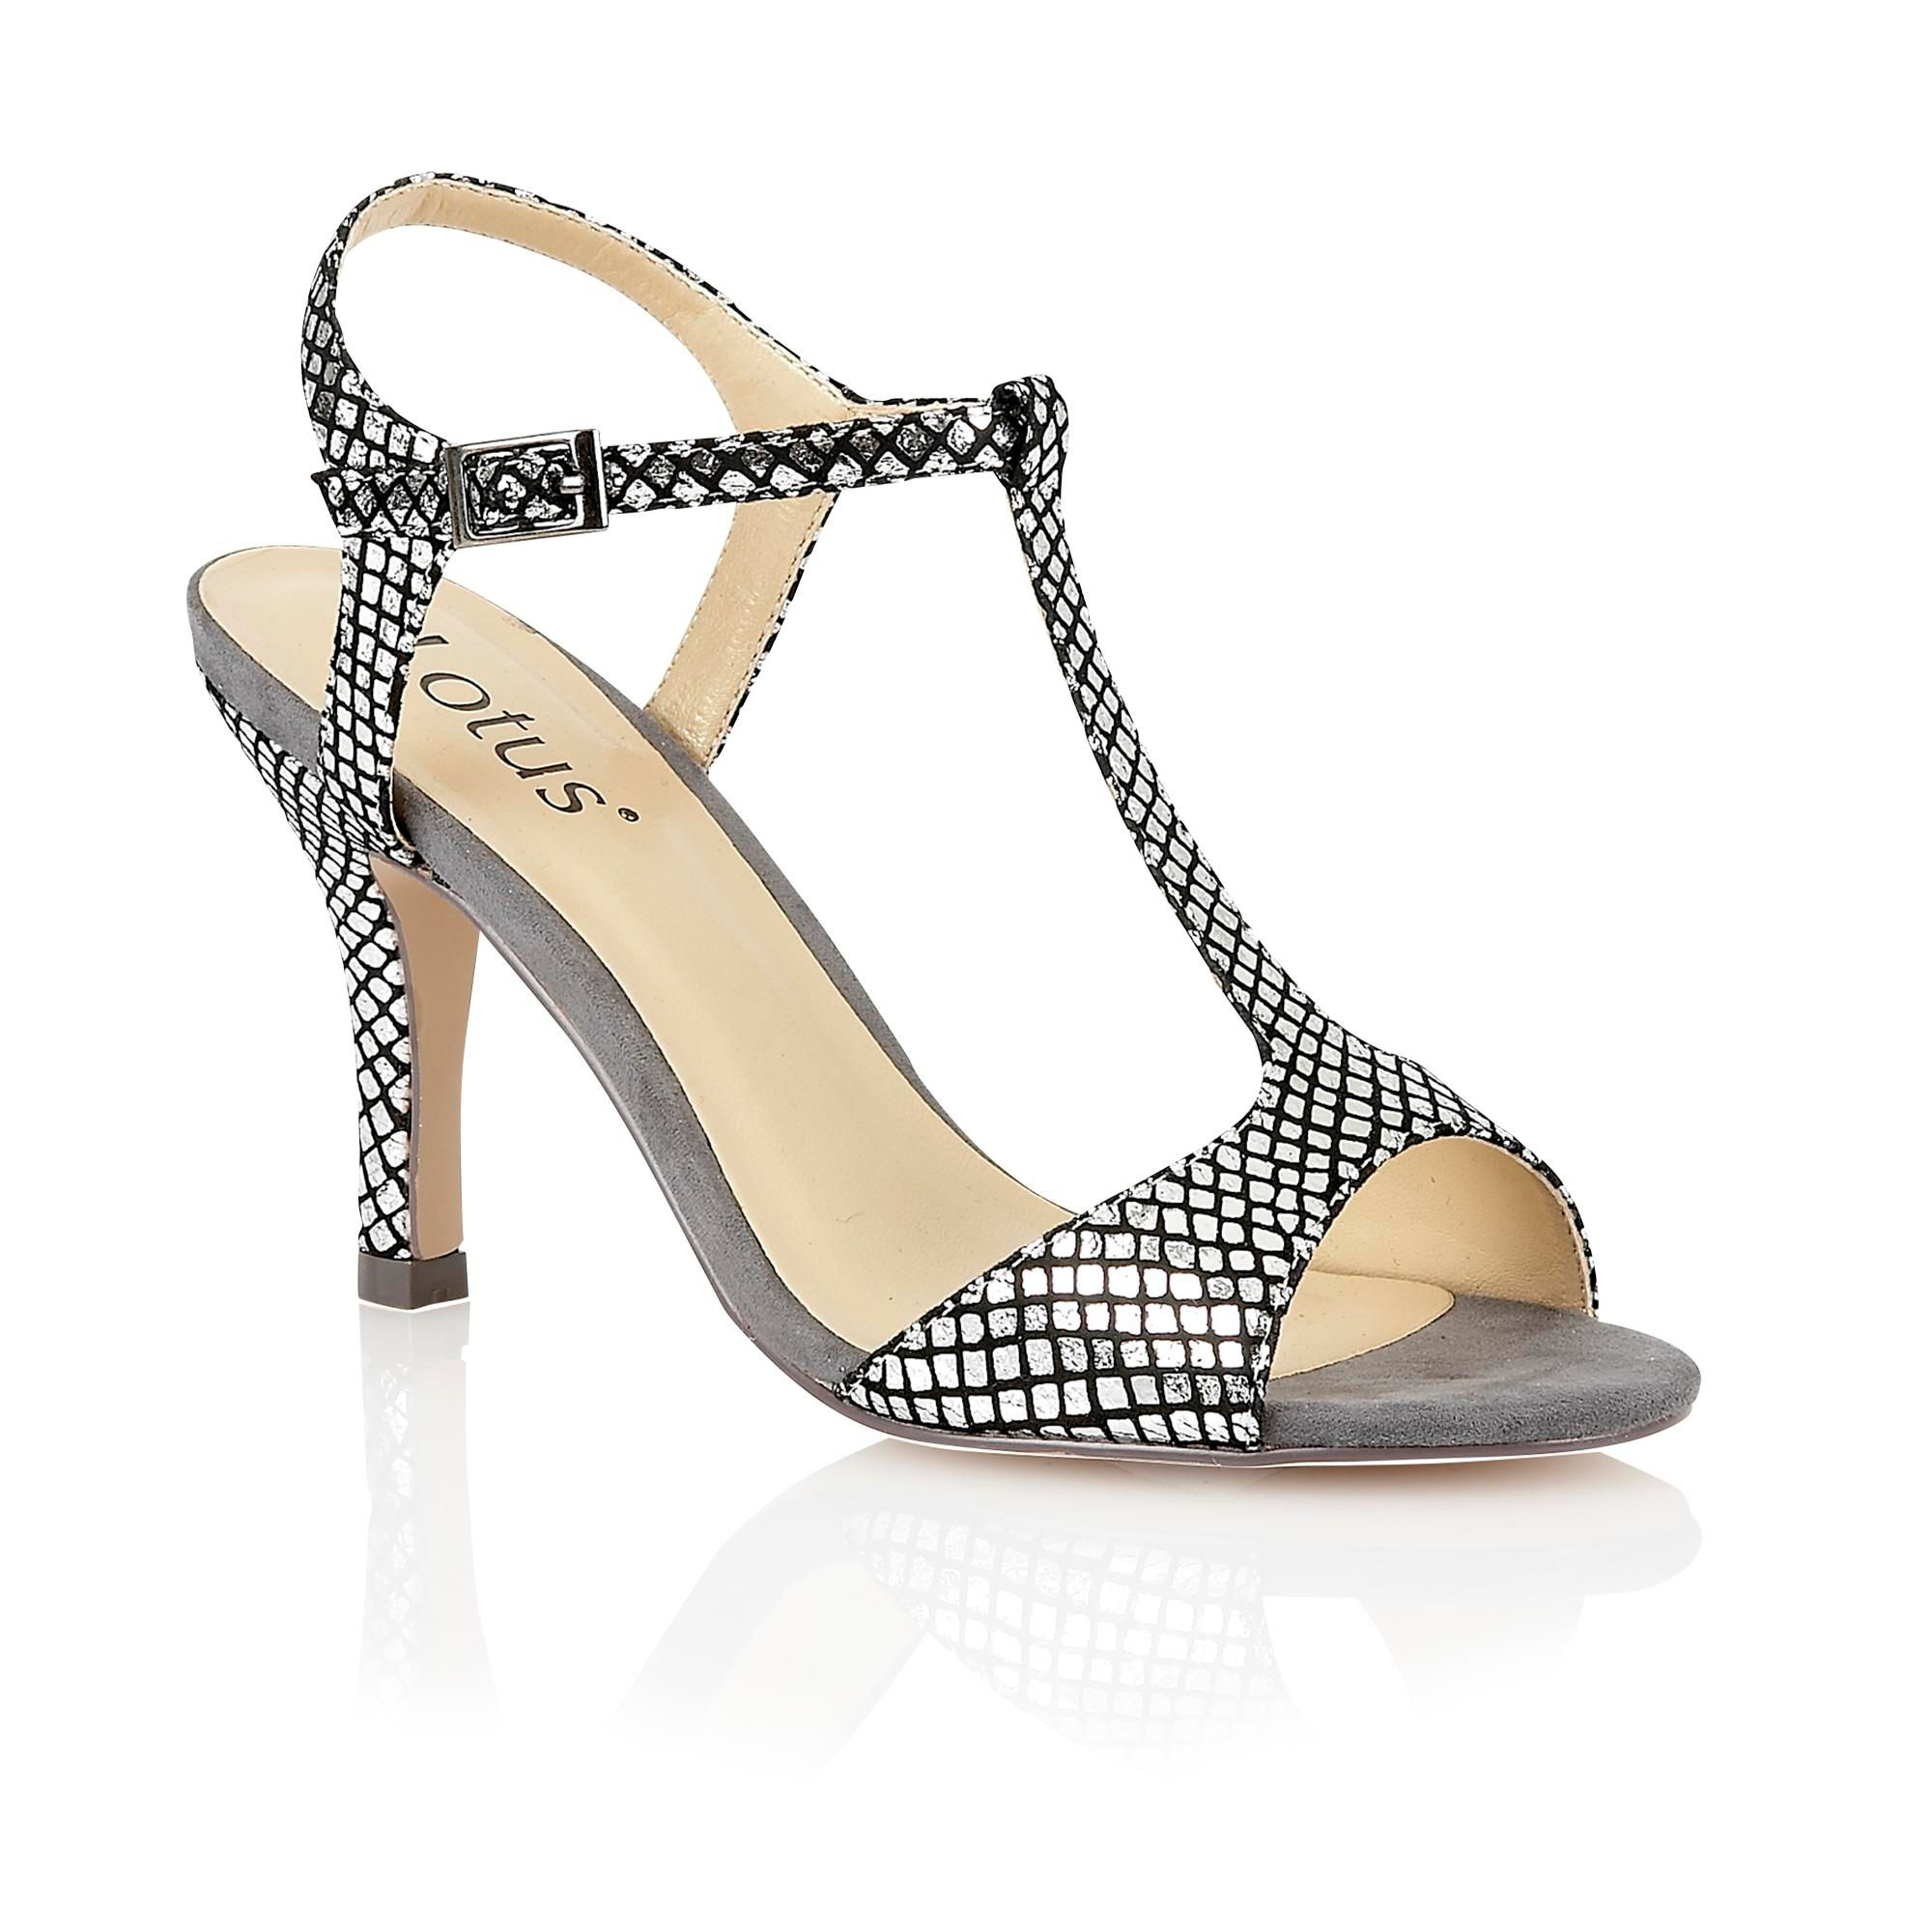 Lotus Julieanna Open Toe Shoes in Silver (Pewter)